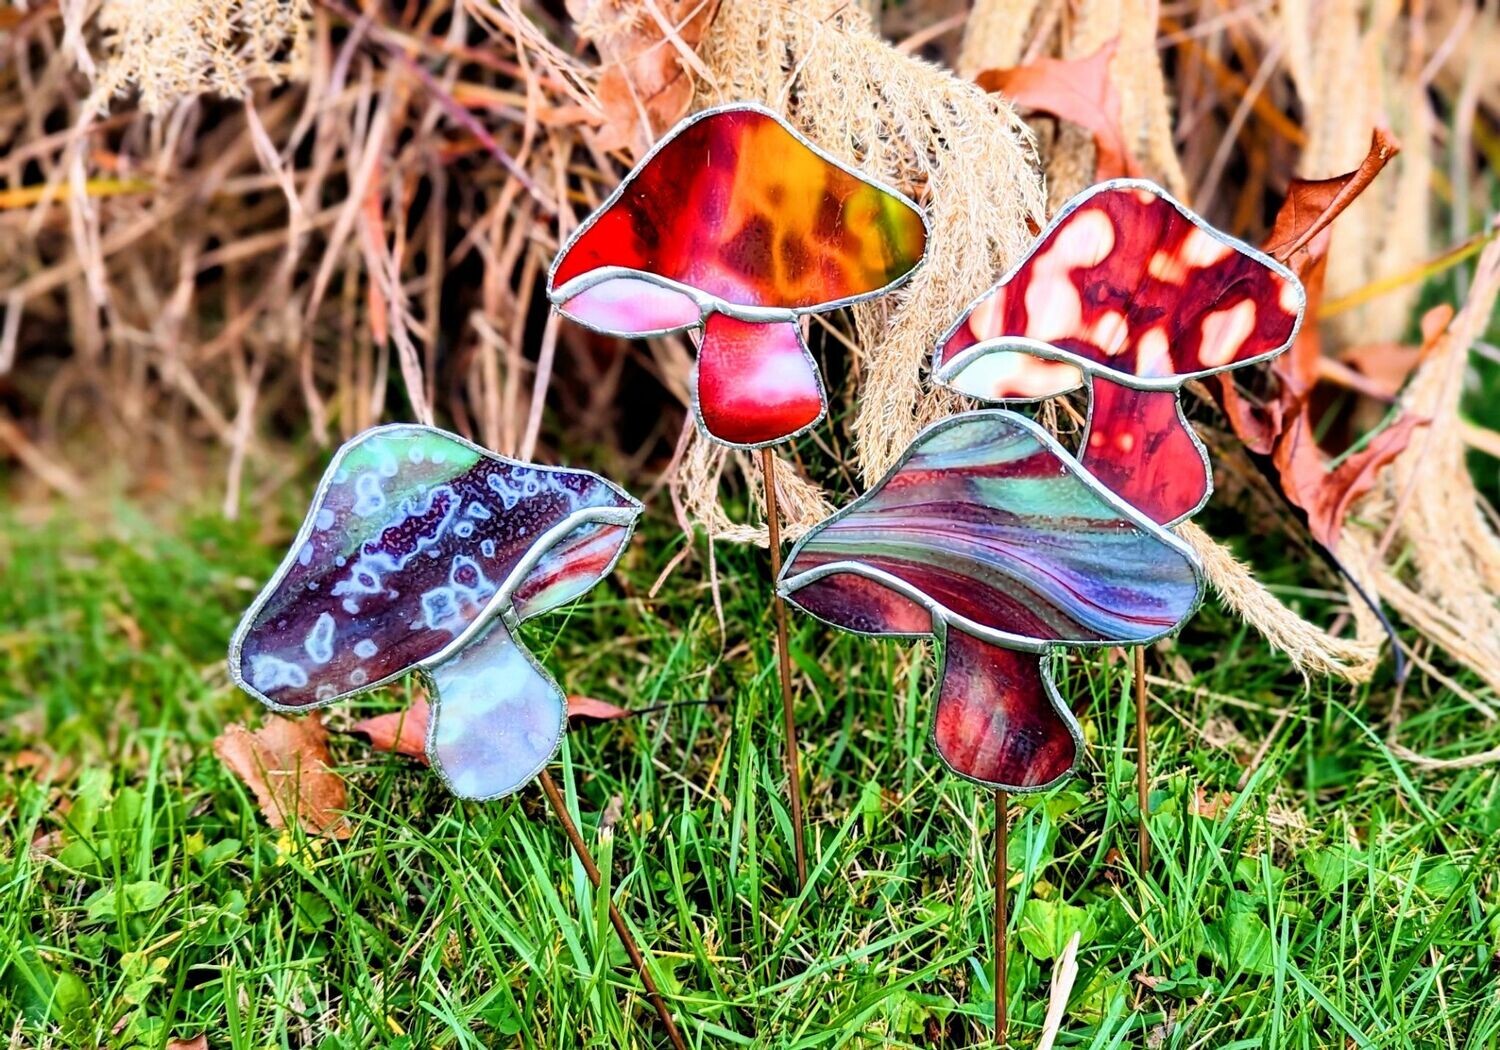 Stained Glass Garden Stake Mushroom*April 15th*12pm